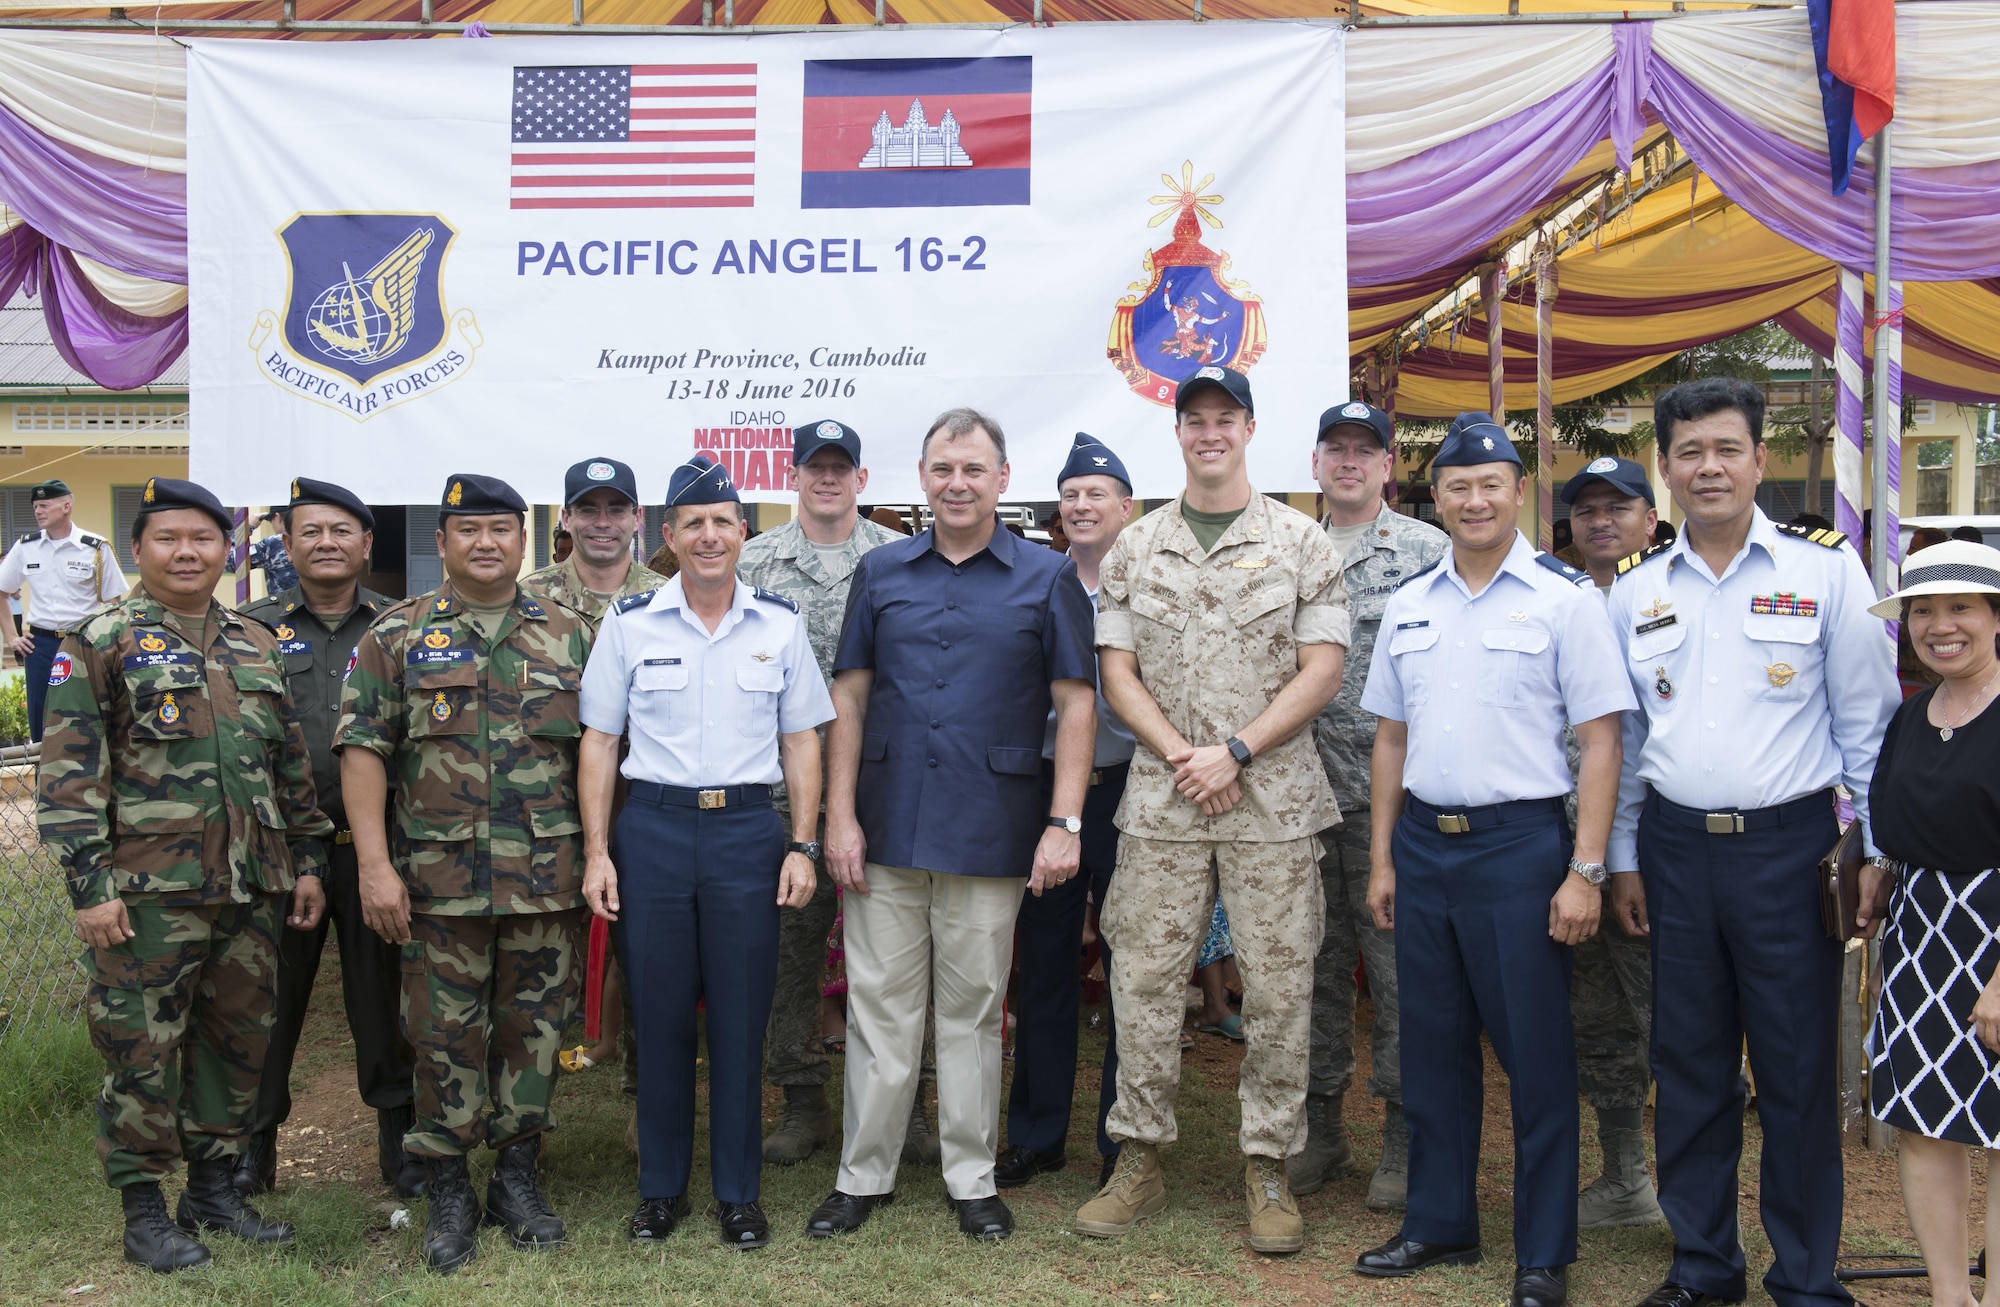 U.S. Ambassador to Cambodia, William Heidt, poses for a photo with members of Pacific Angel Team at Wat Steung Primary School after the closing ceremony of Pacific Angel 16-2 June 20, 2016, in Kampot Province, Cambodia. Pacific Angel 16-2 is a humanitarian assistance/civil military operation mission designed to foster relations and partnerships between the U.S., Cambodia and several other partner nations through subject matter expert exchanges, medical aid and civil engineering projects. (U.S. Air Force photo by Senior Airman Omari Bernard/Released)